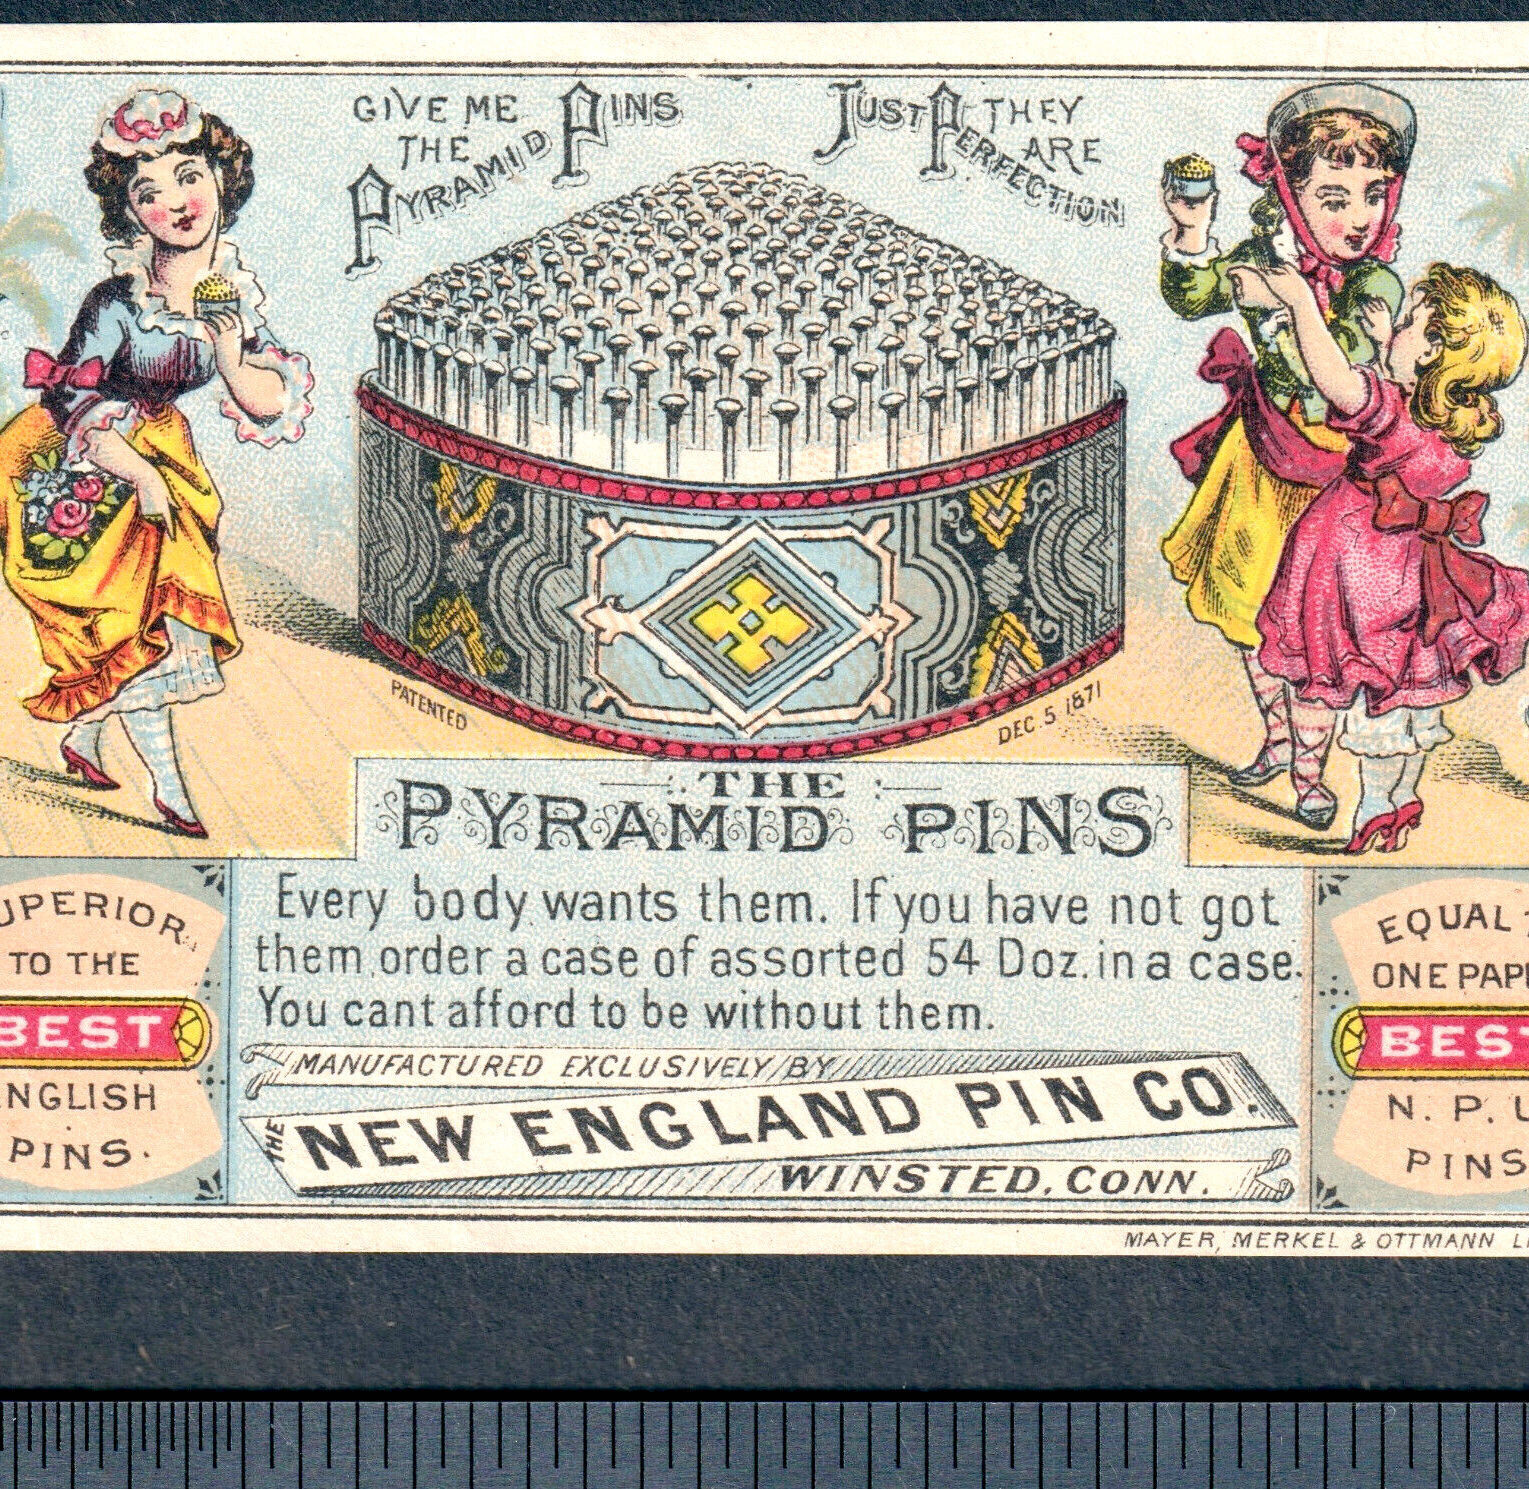 New England Pin Company 1800\'s Winsted CT Pyramid Pins Adv Victorian Trade Card